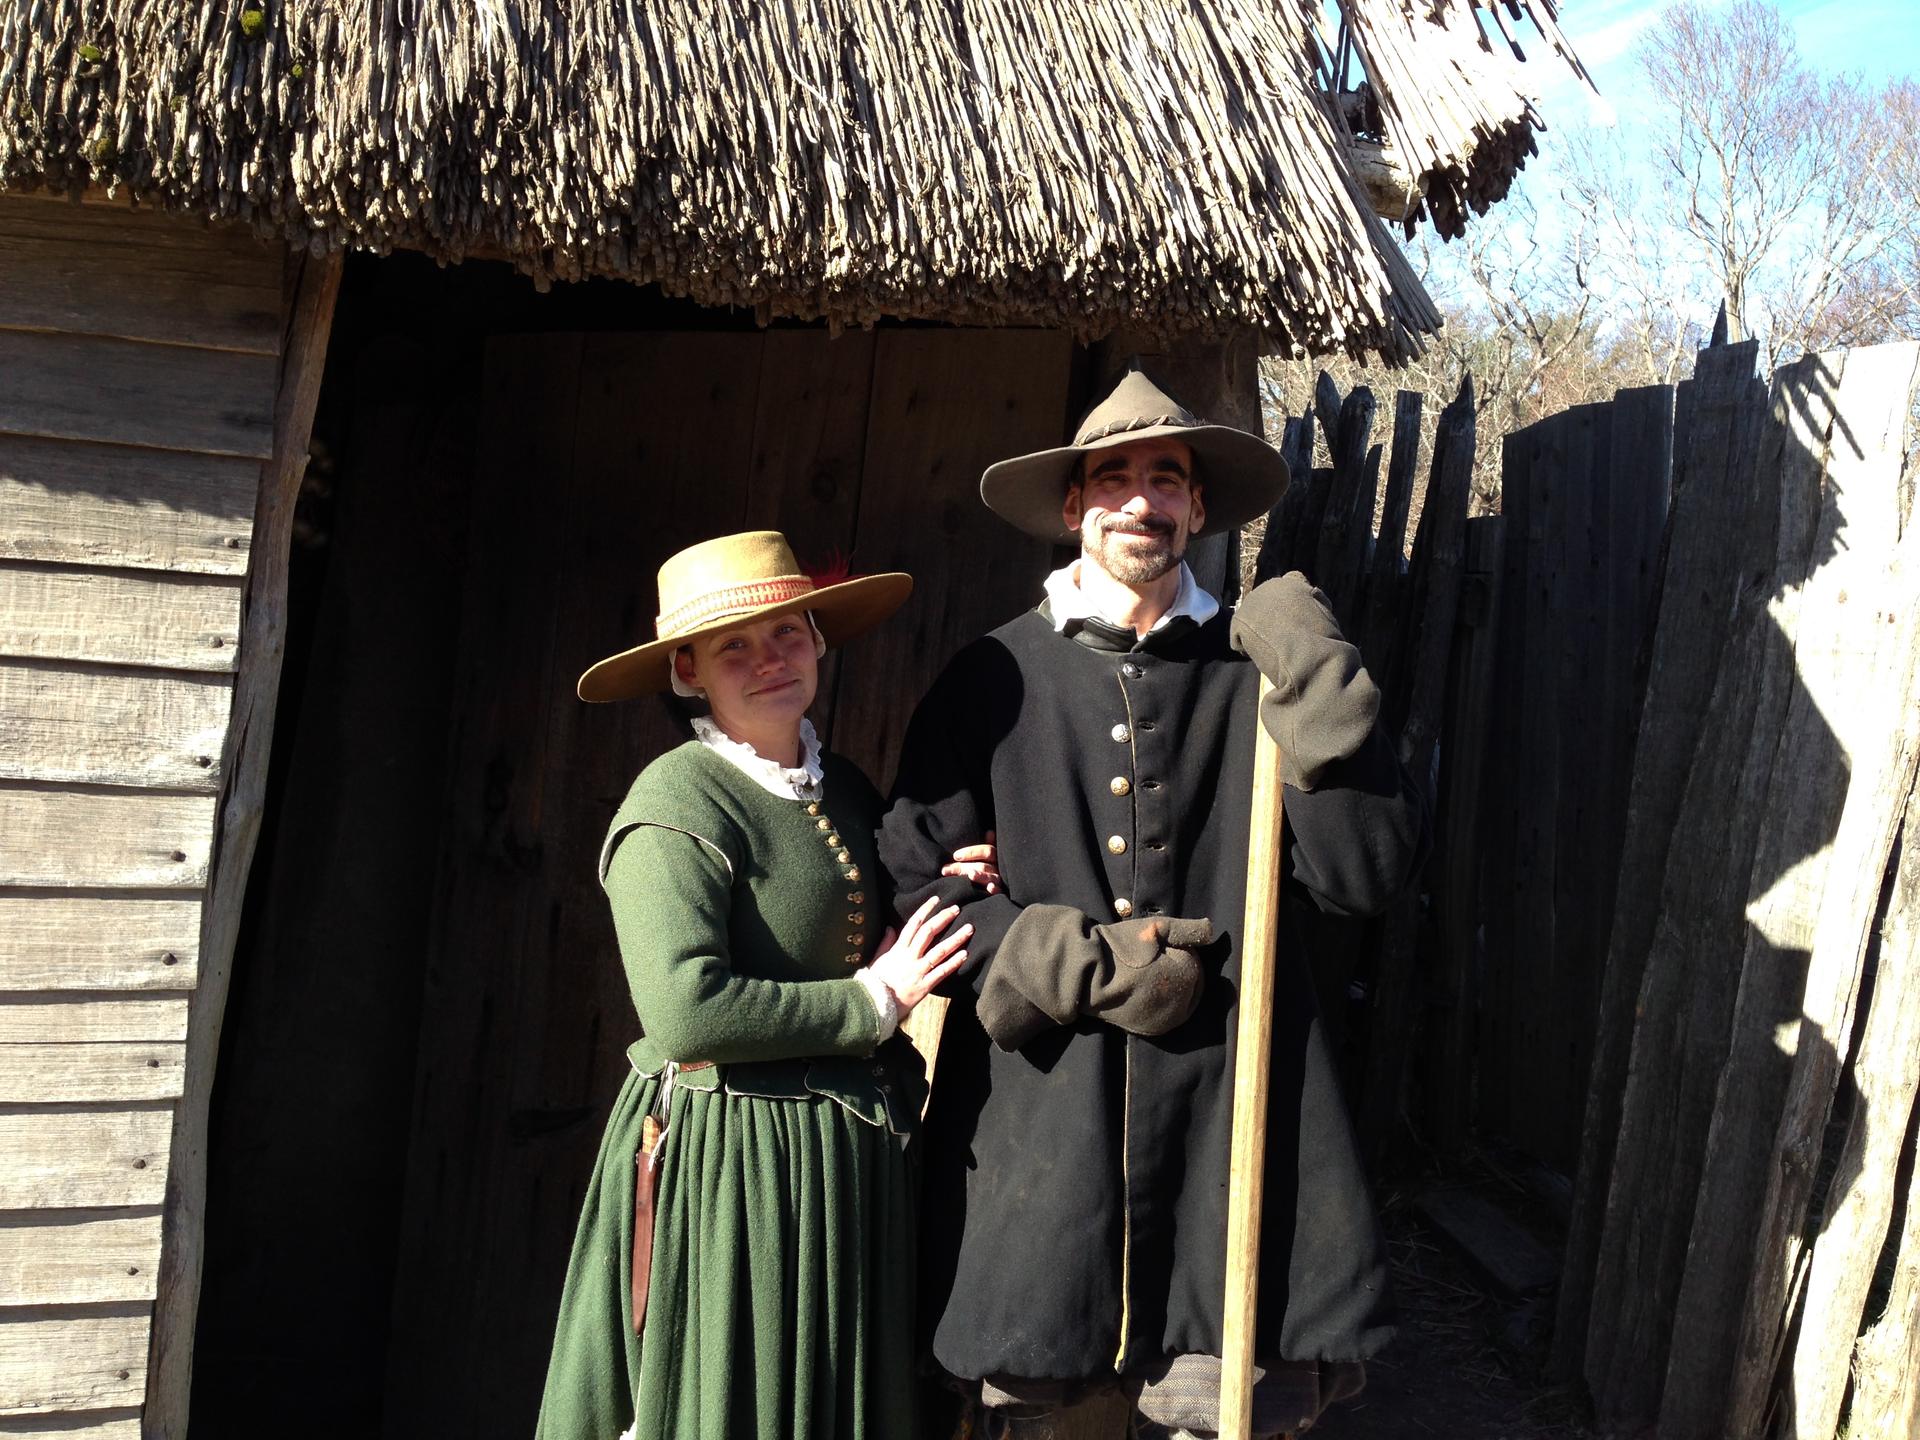 William and Alice Bradford in the doorway to their home. The couple is portrayed by real life couple, Chris and Norah Messier.